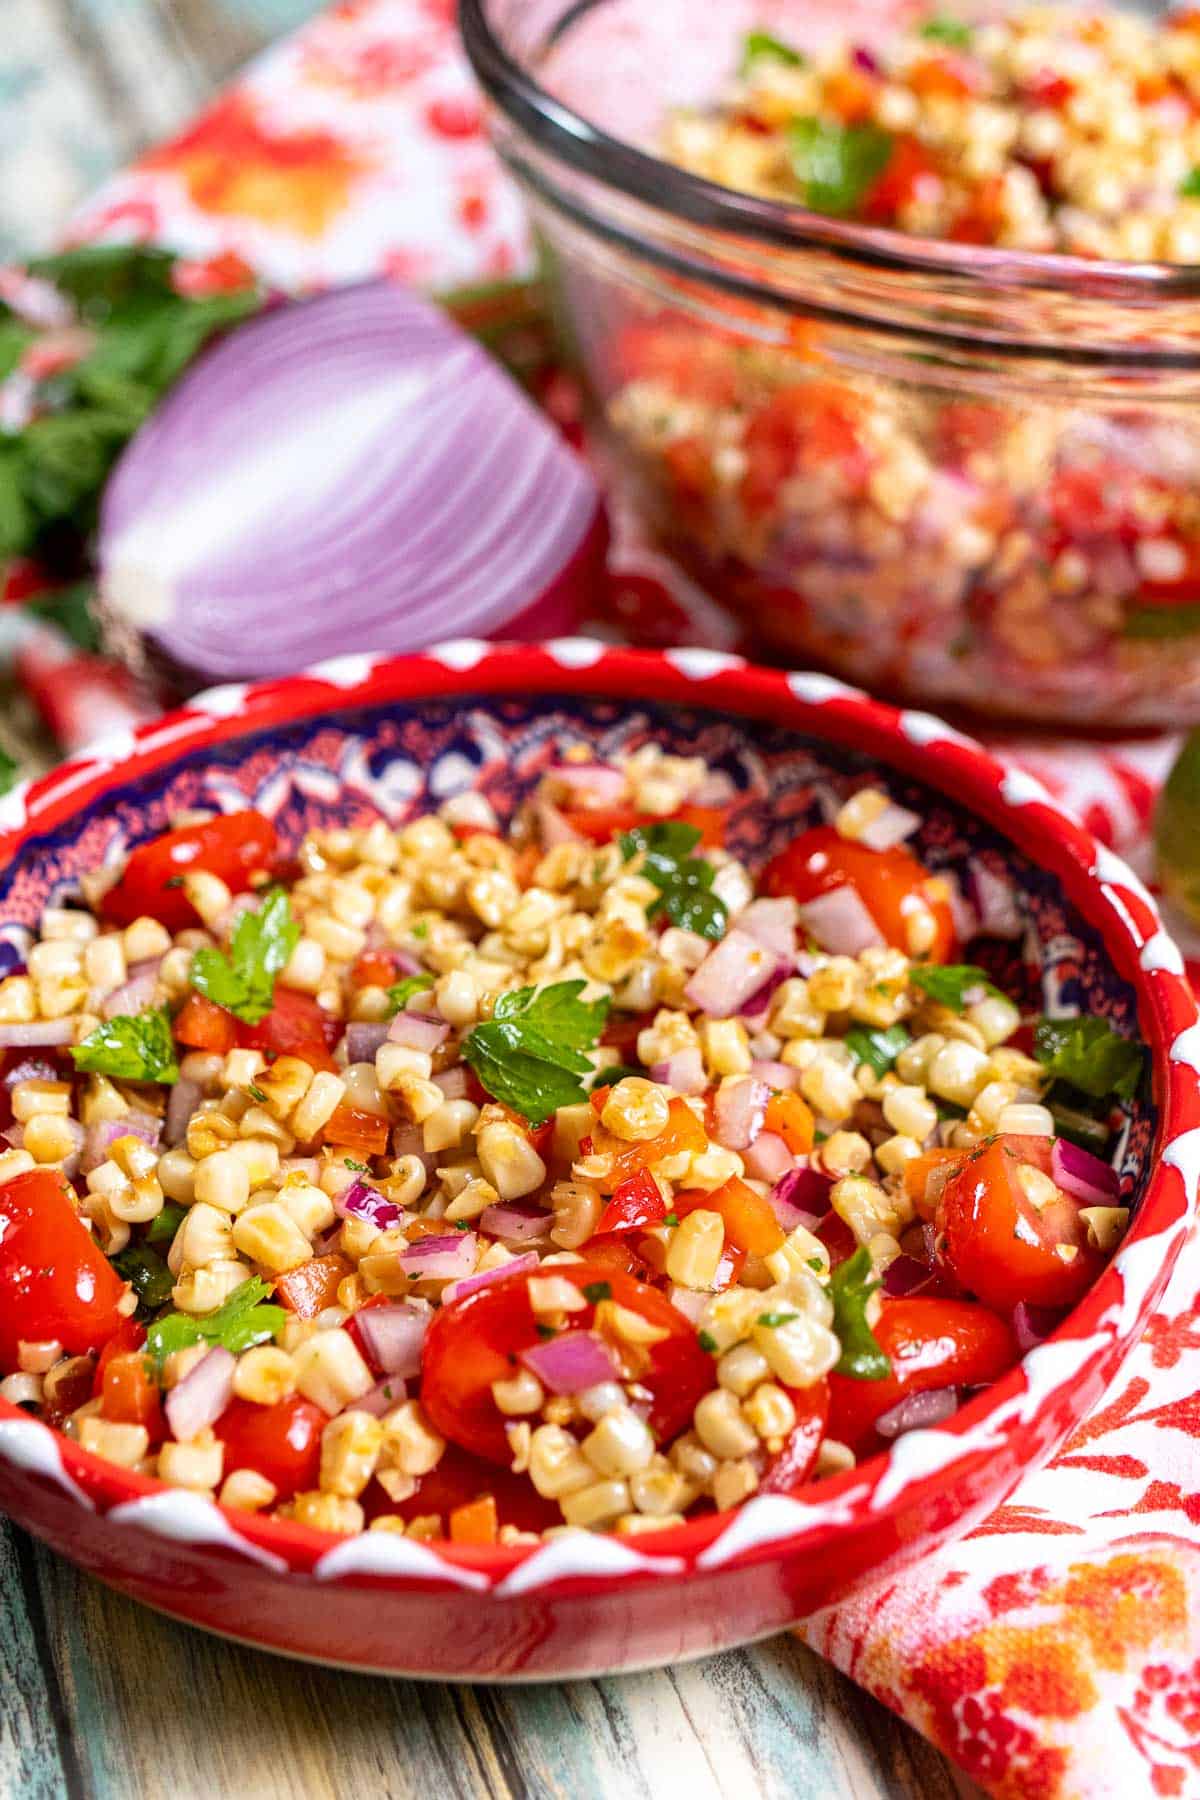 Closer view of grilled corn salad in a red and white bowl with half a red onion and parsley behind it.